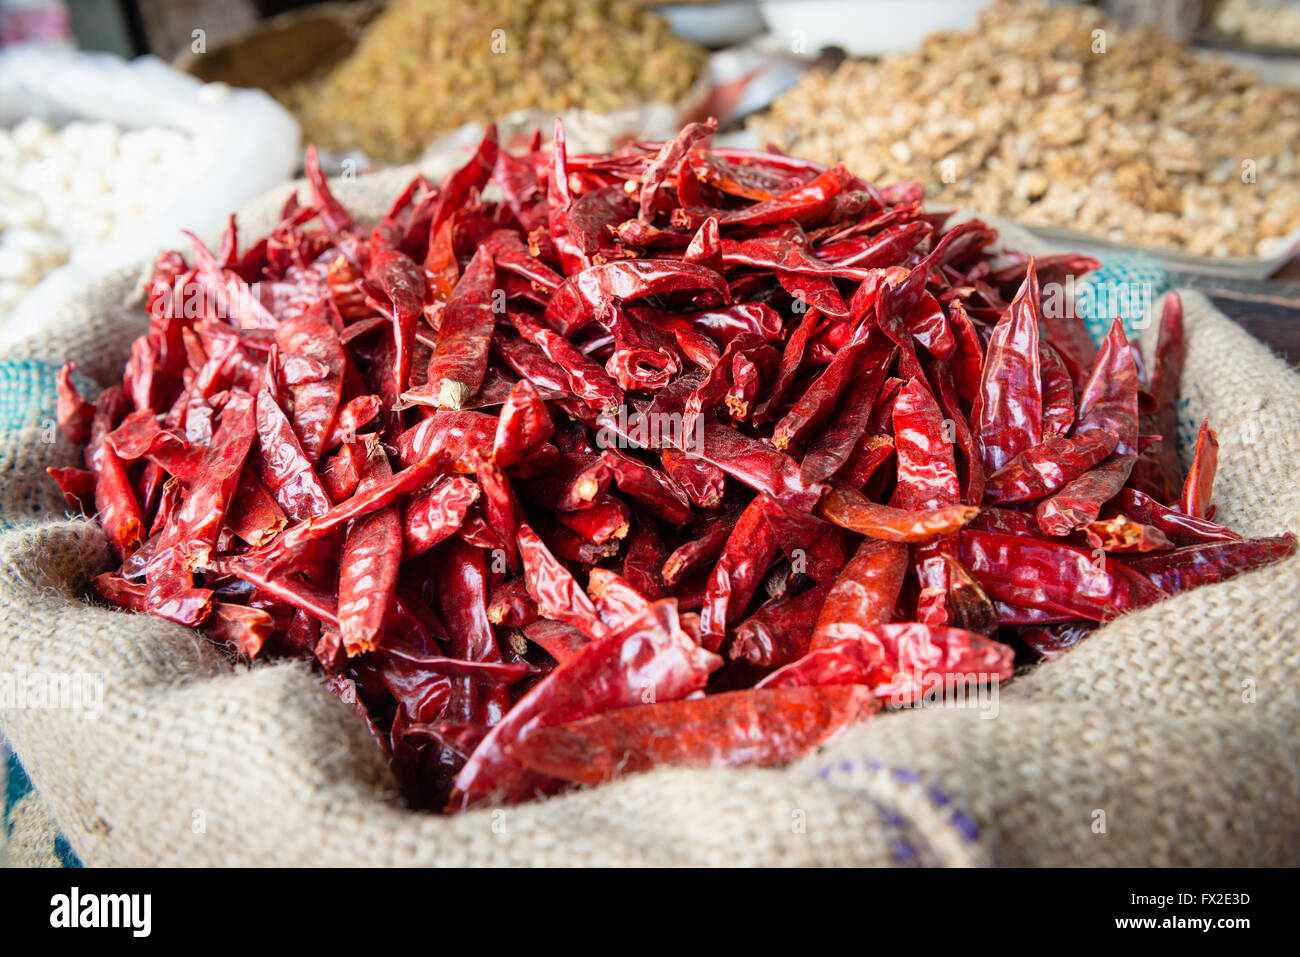 Chilies in market in Chandni Chowk, Old Delhi Stock Photo